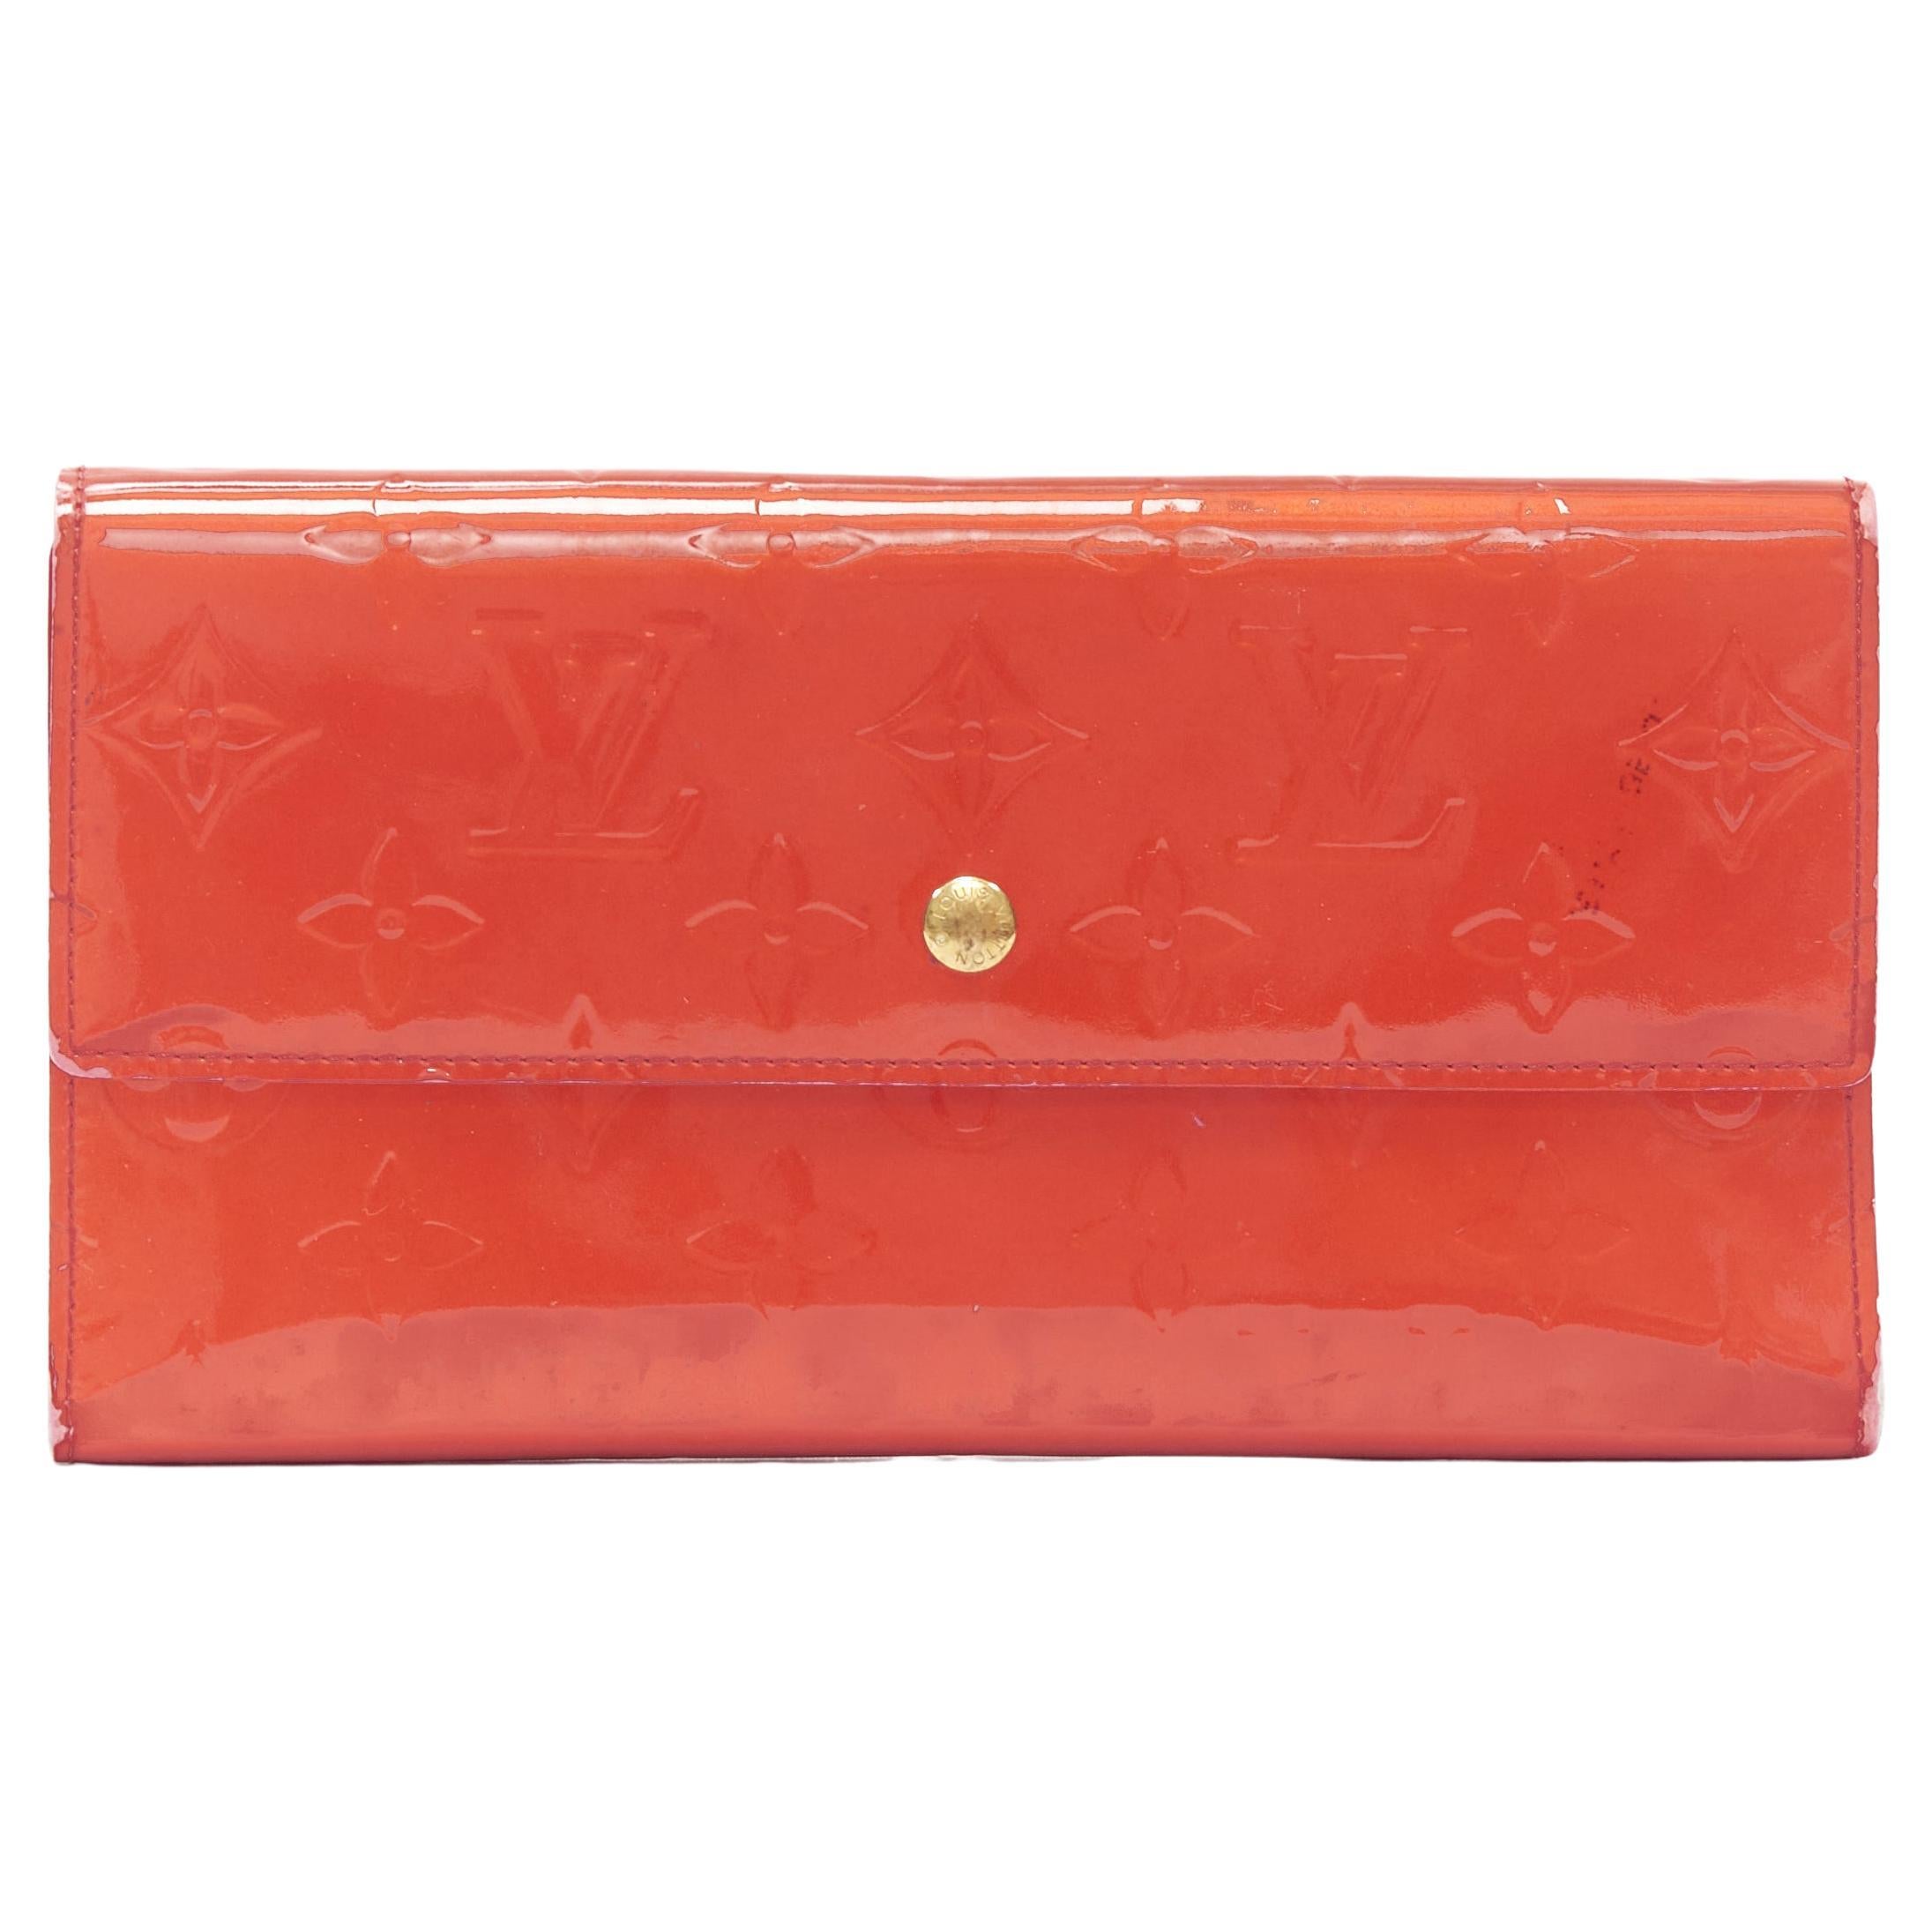 LOUIS VUITTON Vernis red patent LV logo emboss flap continental wallet